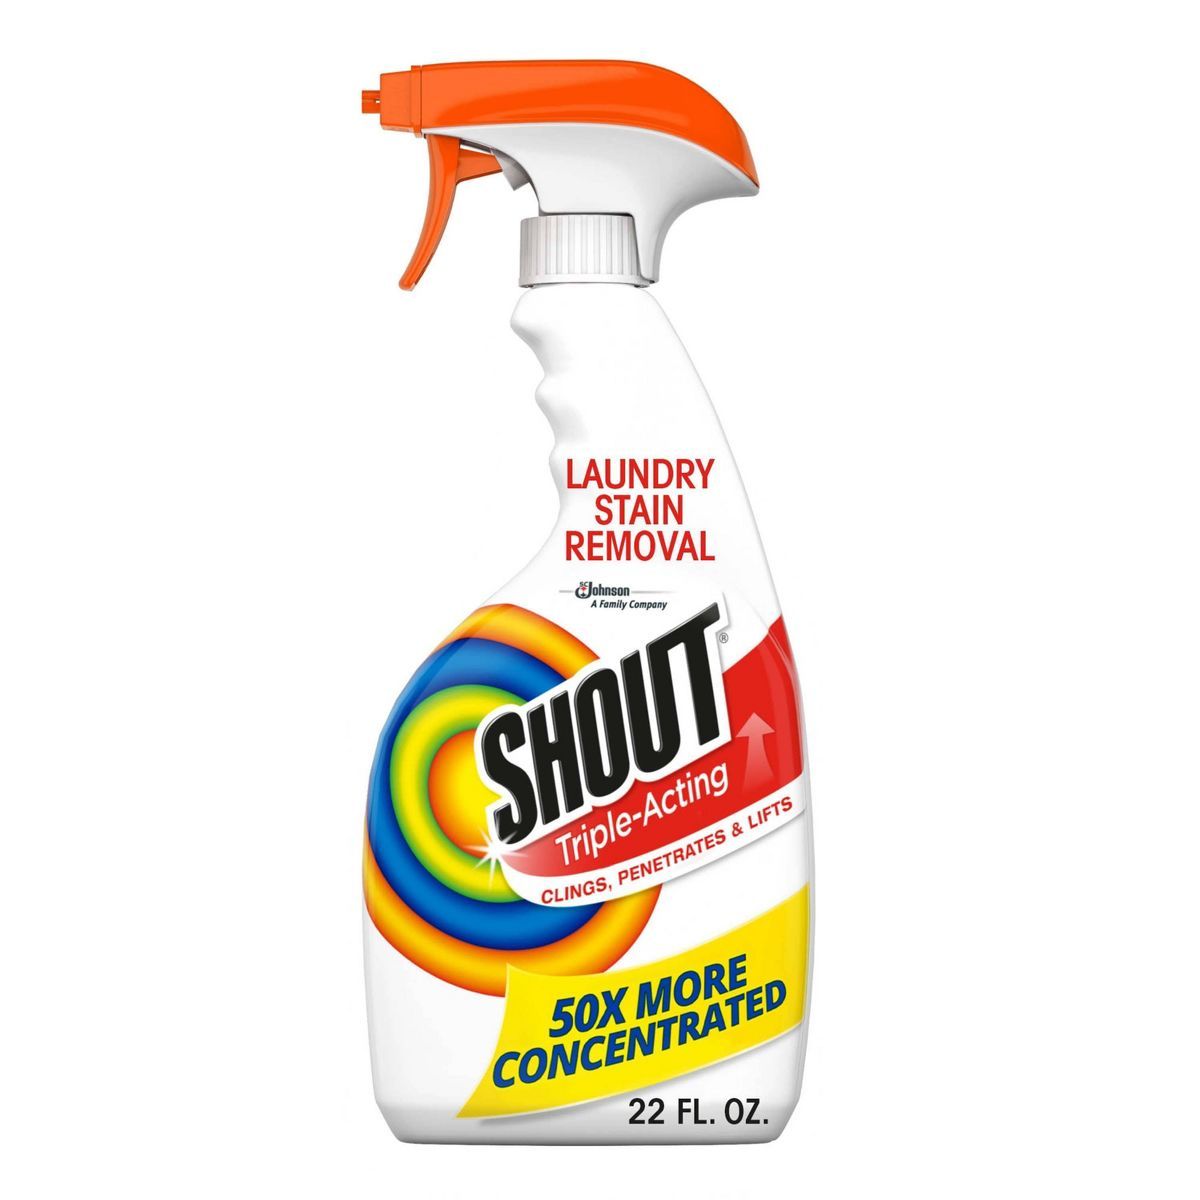 Shout Triple-Acting Stain Remover Spray - 22 fl oz | Target